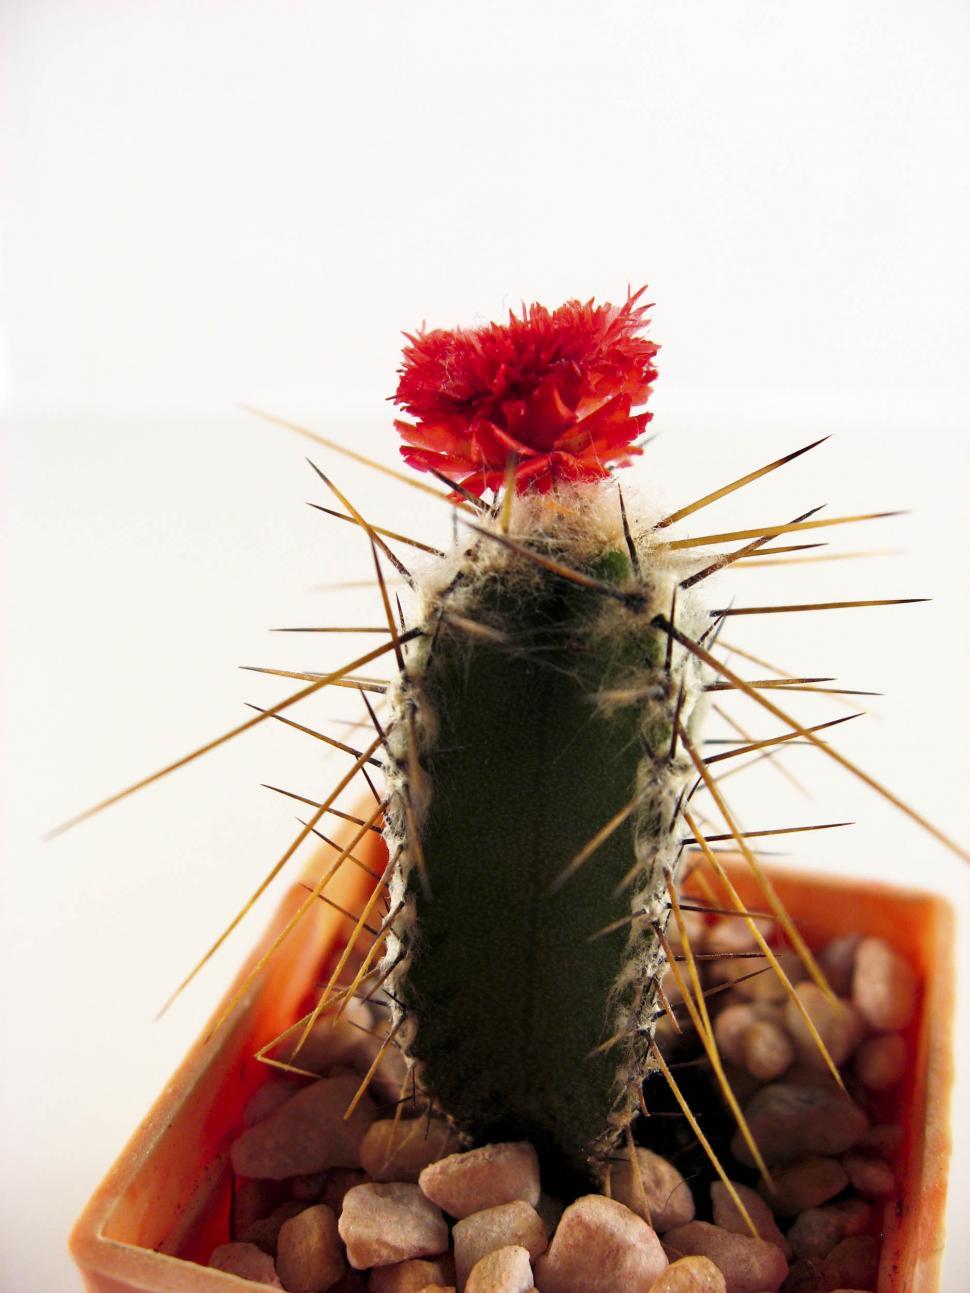 Free Image of Cactus and bloom 